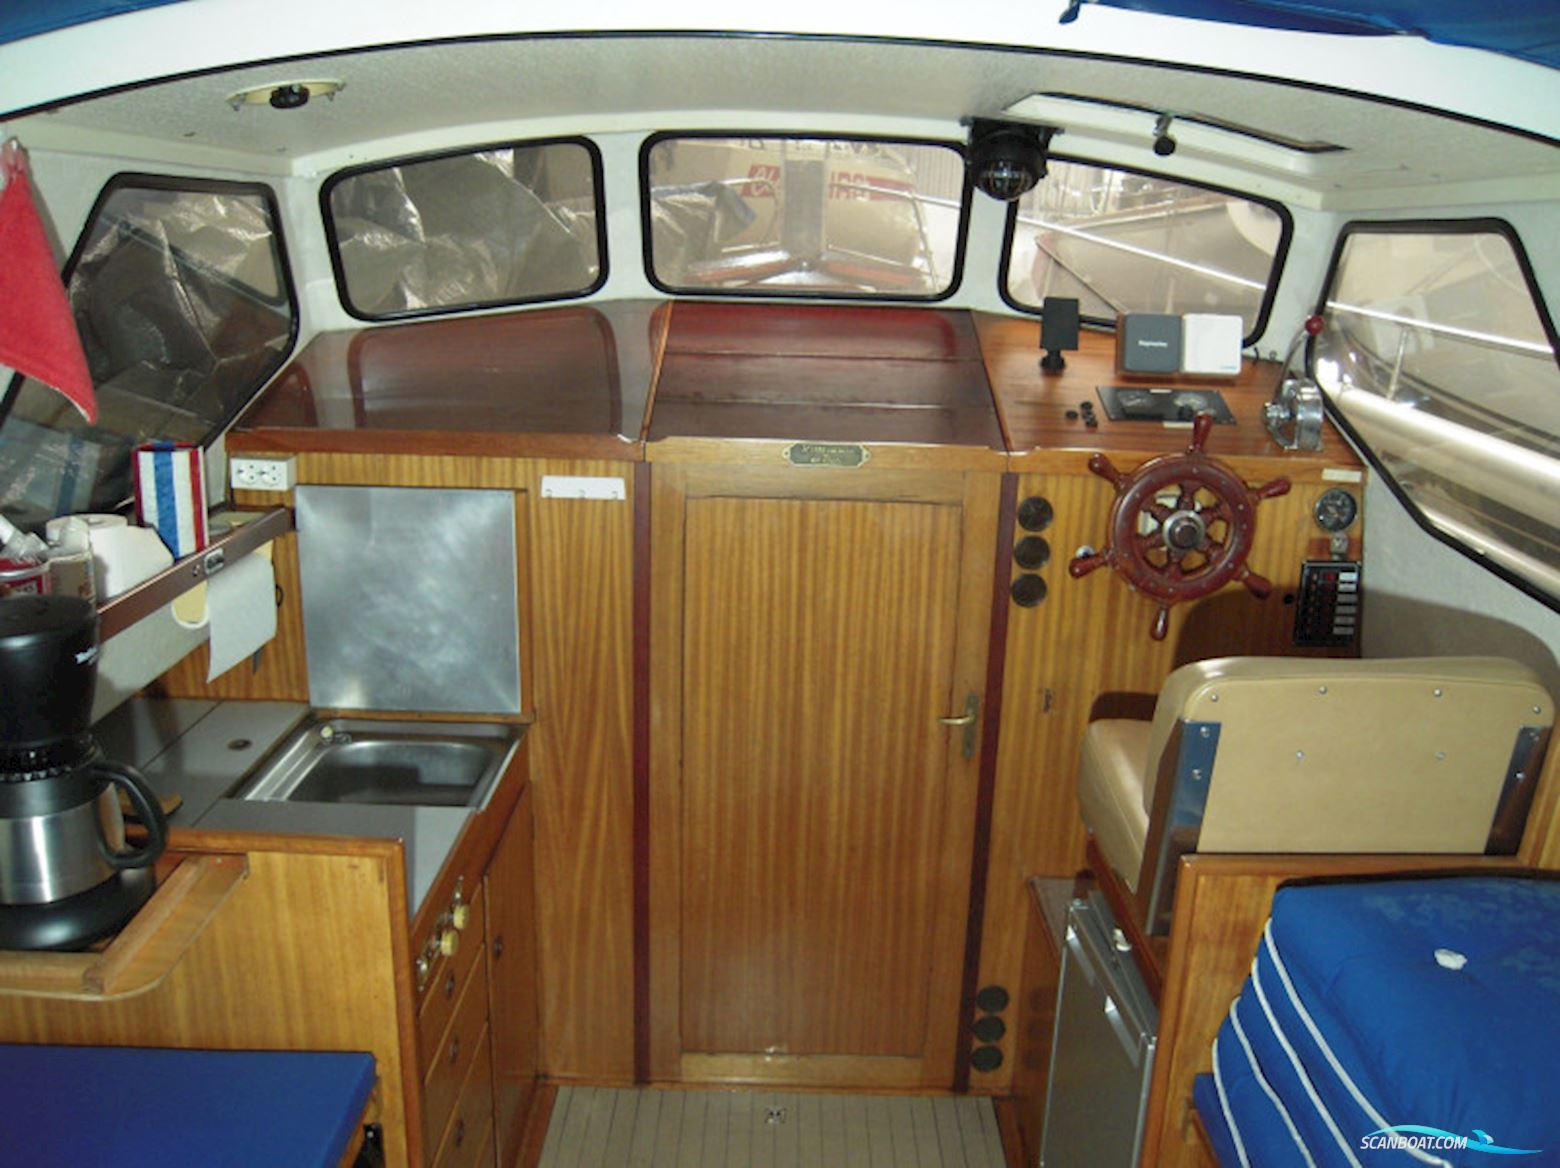 LM 27 Motor sailor 1977, with Nanni 4-Zyl. Diesel engine, Germany